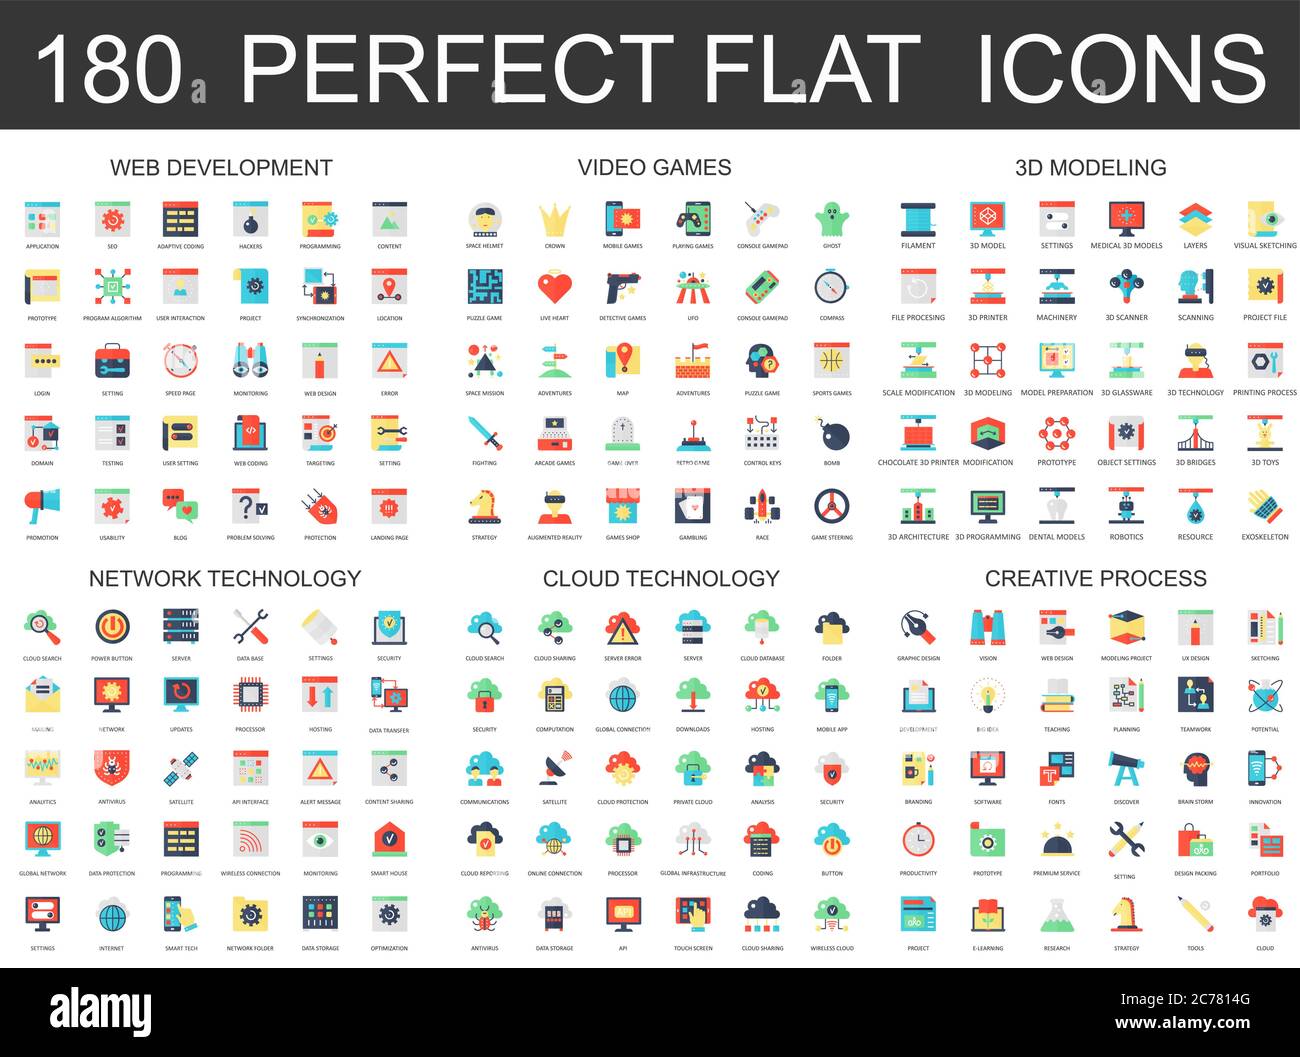 180 modern flat icons set of web development, video games, 3d modeling, network cloud technology, creative process icons Stock Vector